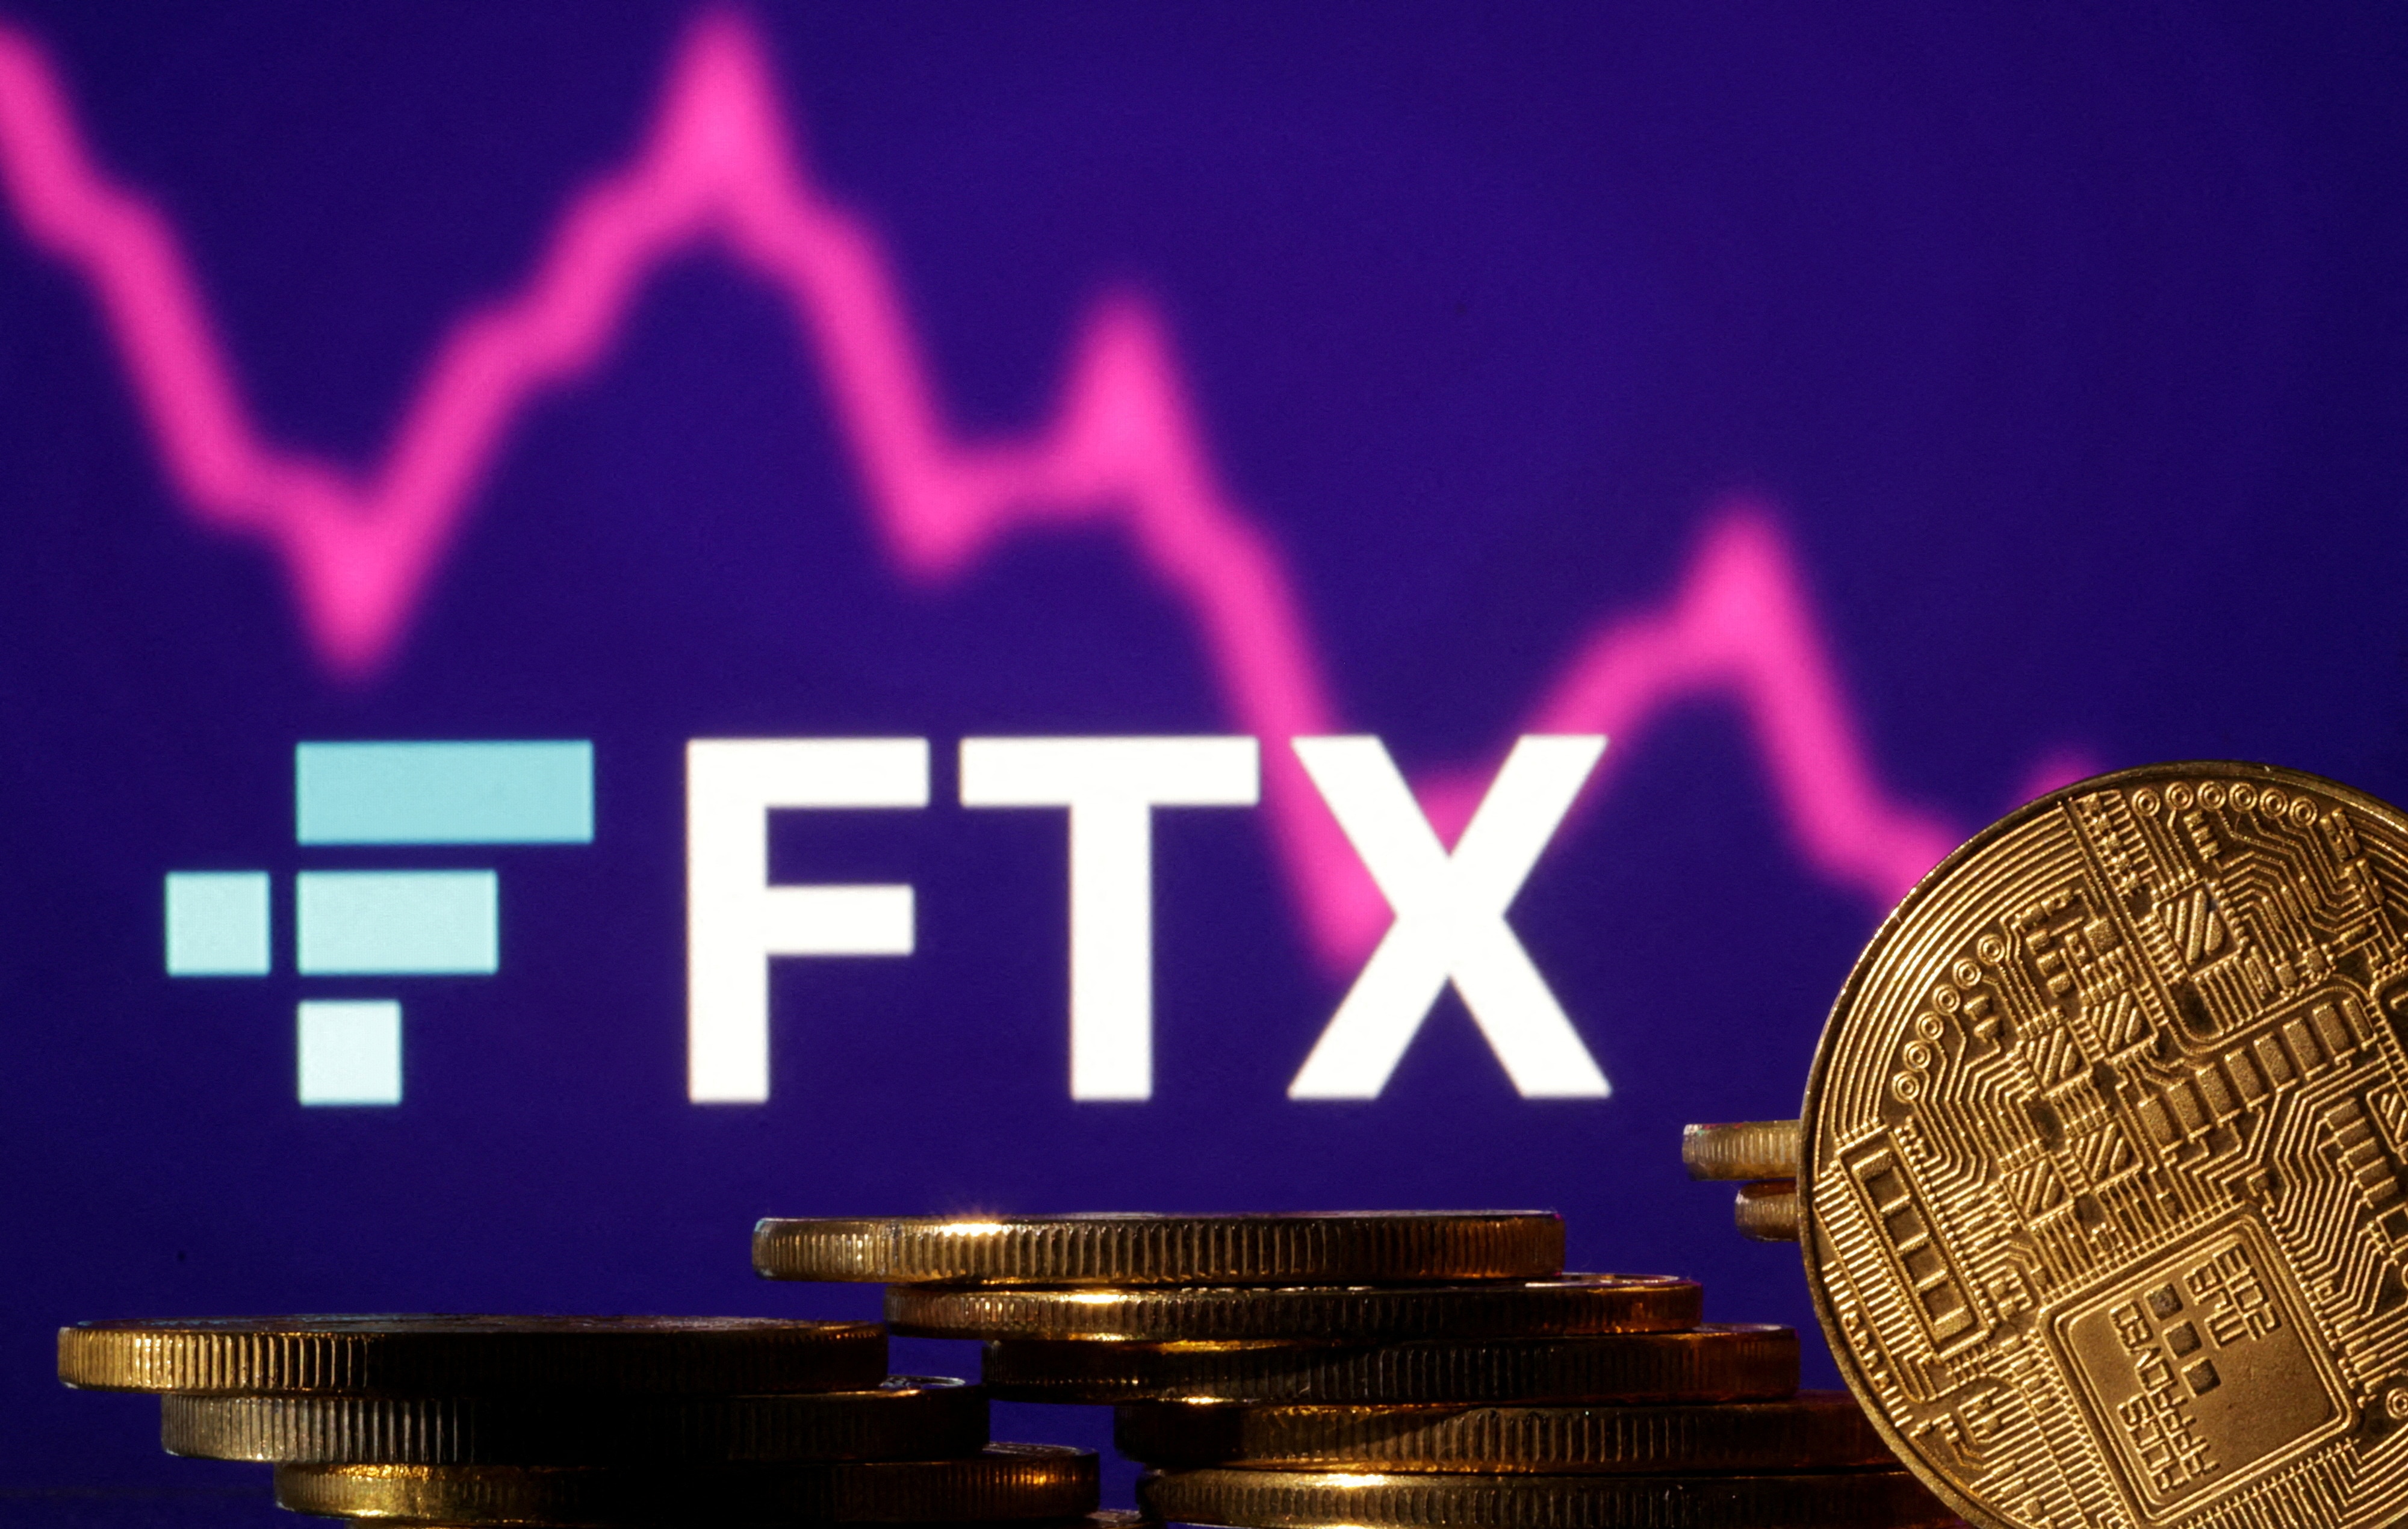 Hackers Stole $415 Million In Cryptocurrency After Bankruptcy: FTX Chief